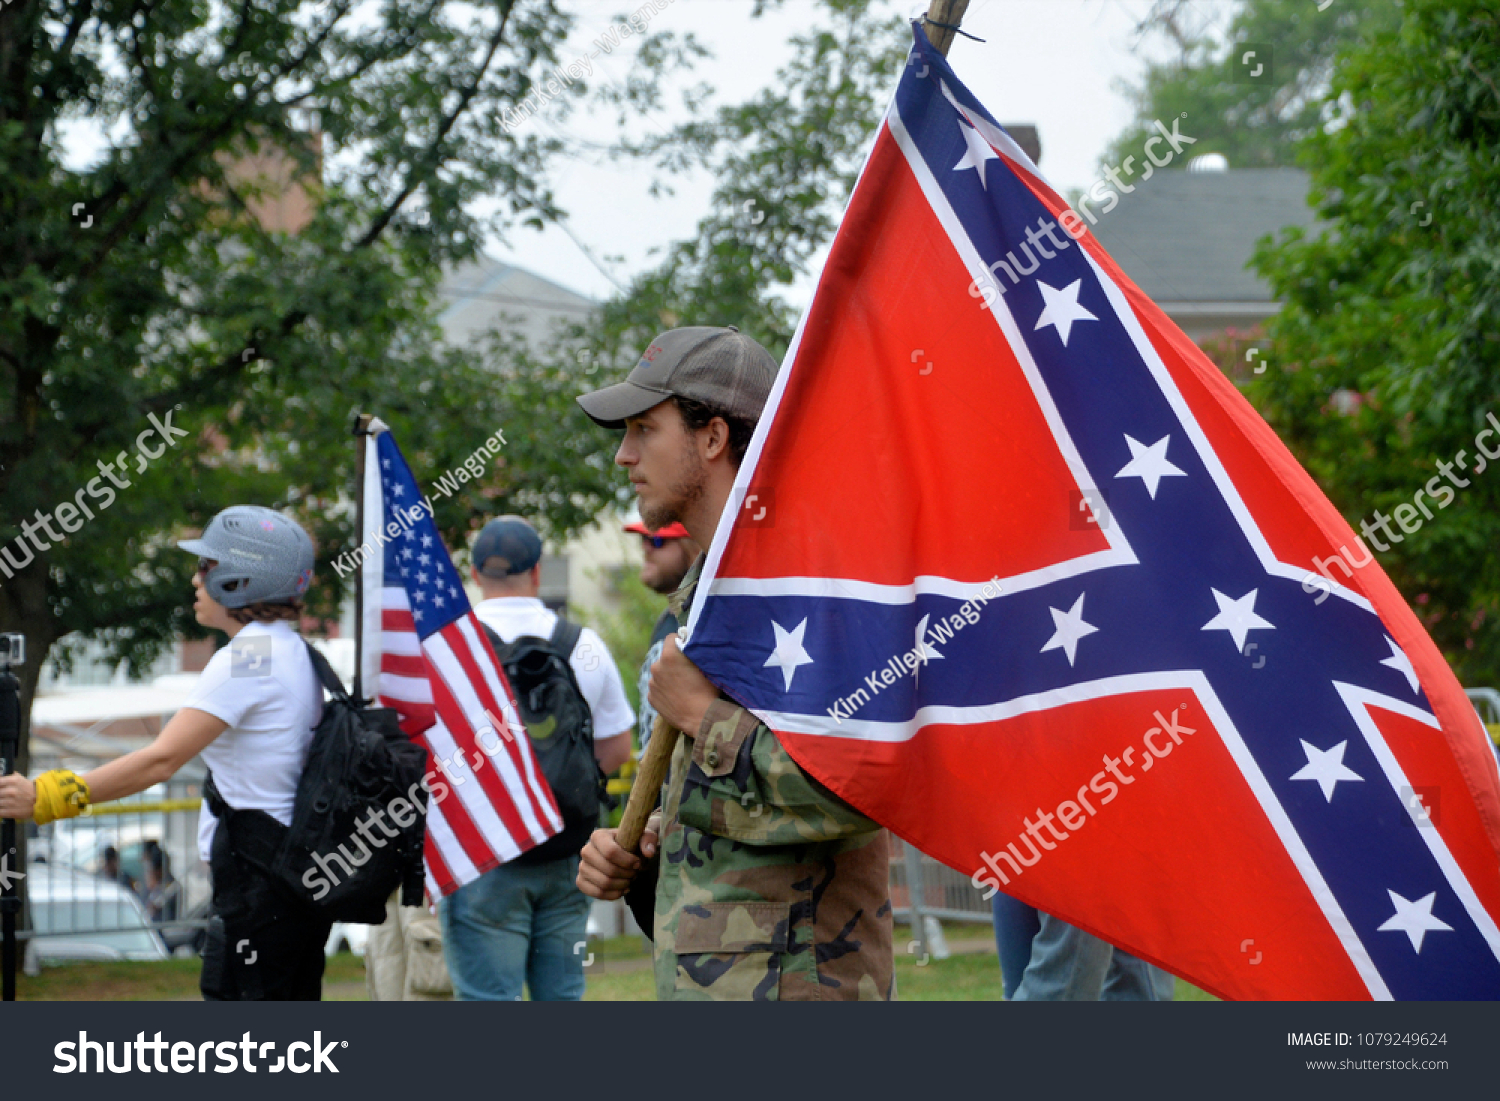 “Dear God, please help me to hate white people.” Stock-photo-charlottesville-va-august-members-of-a-white-supremacist-group-at-a-white-nationalist-1079249624